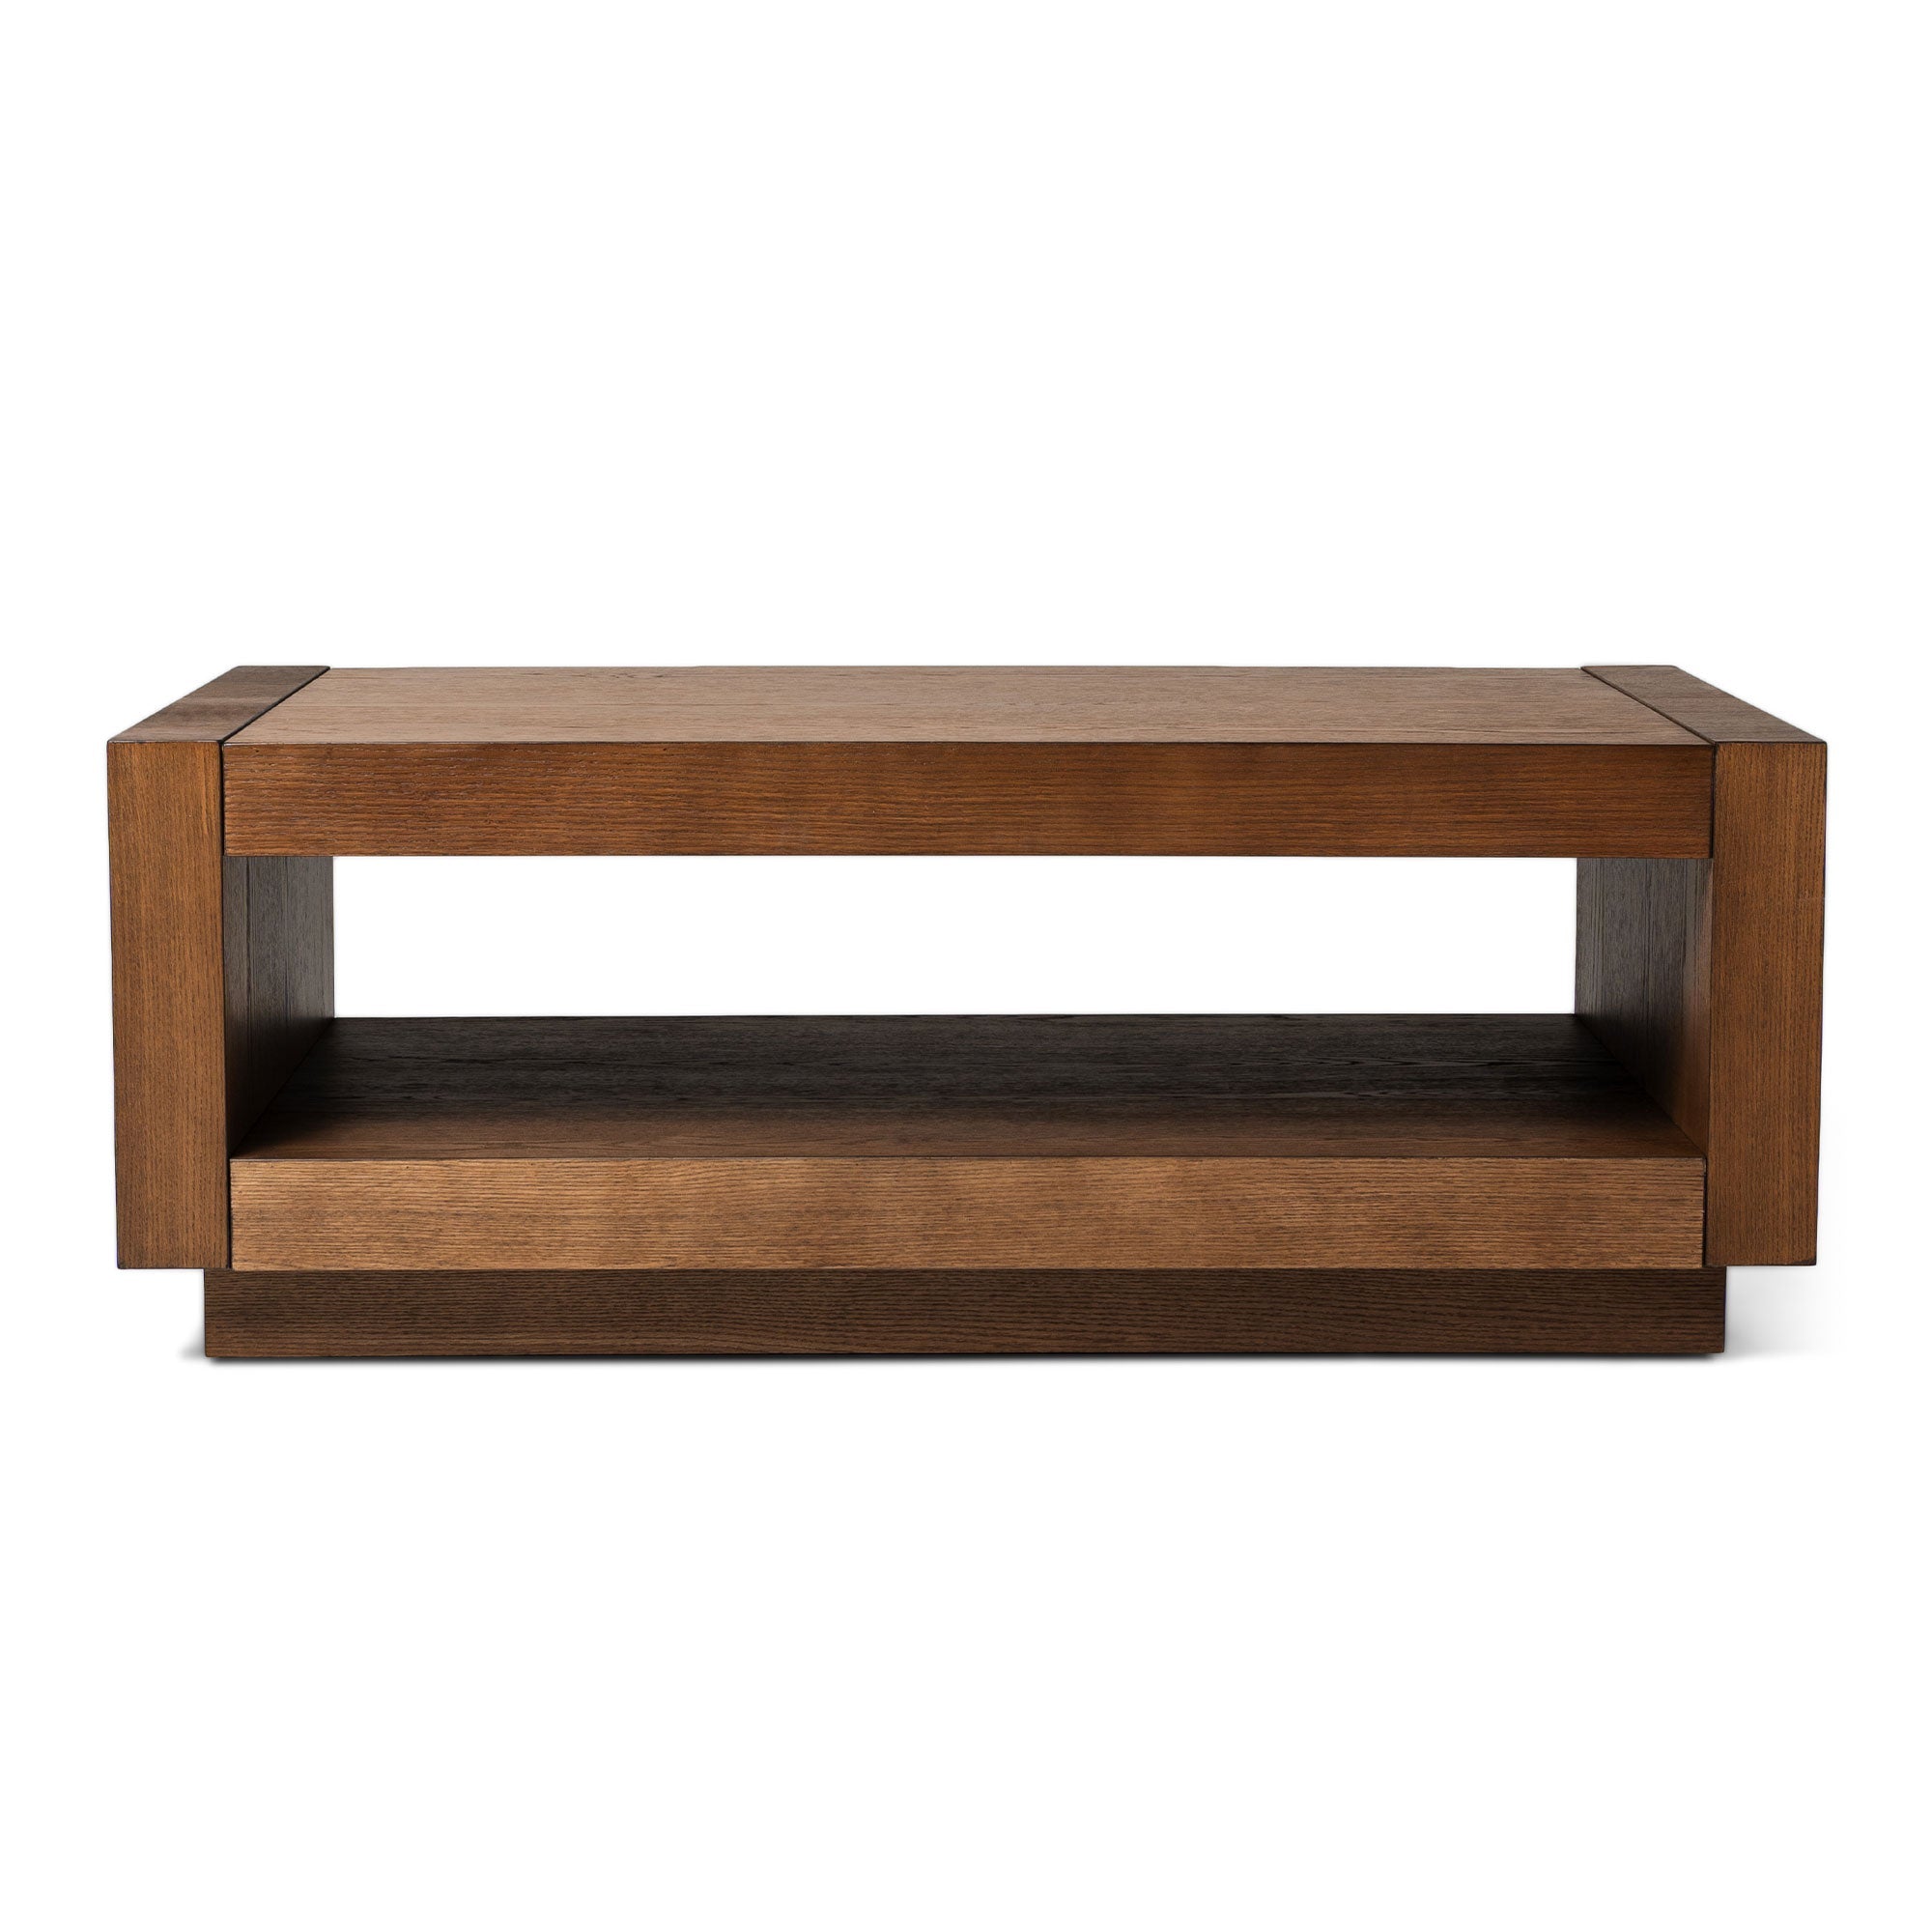 Artemis Contemporary Wooden Coffee Table in Refined Brown Finish